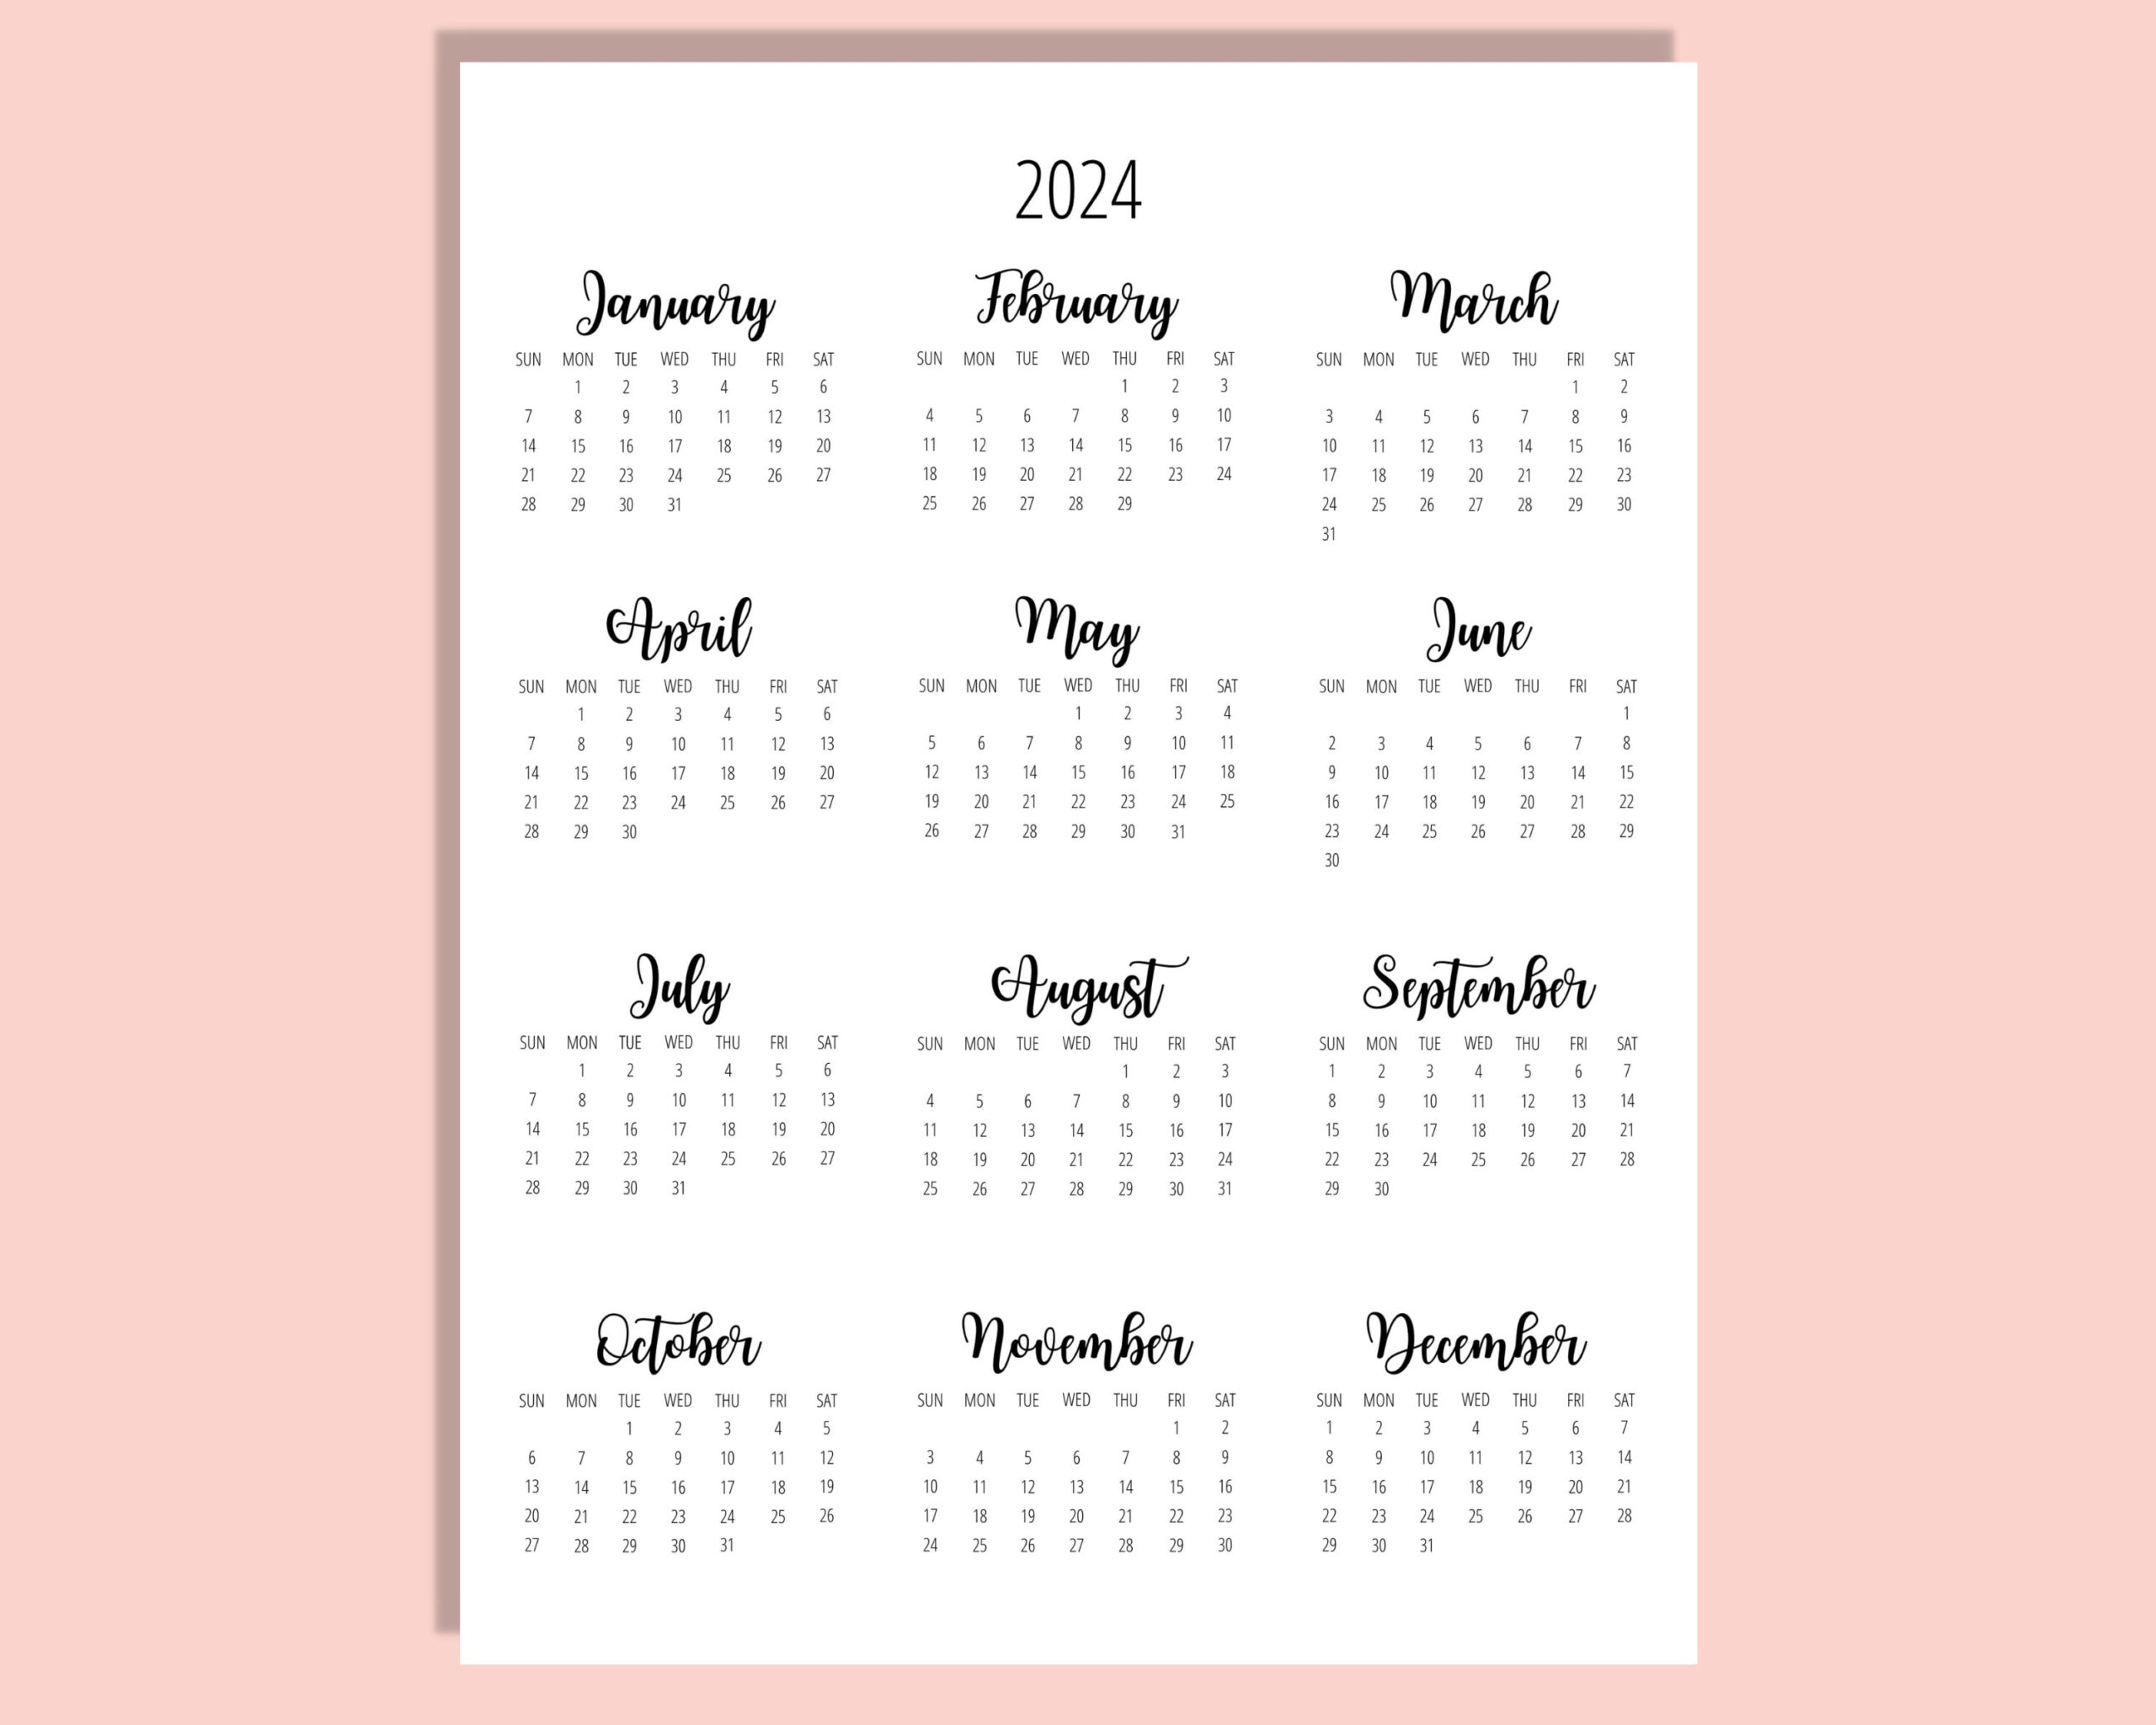 2024 Calendar Template 8.5 X 11 Inches Vertical Year At A - Etsy for Desk Calendar 2024 Printable